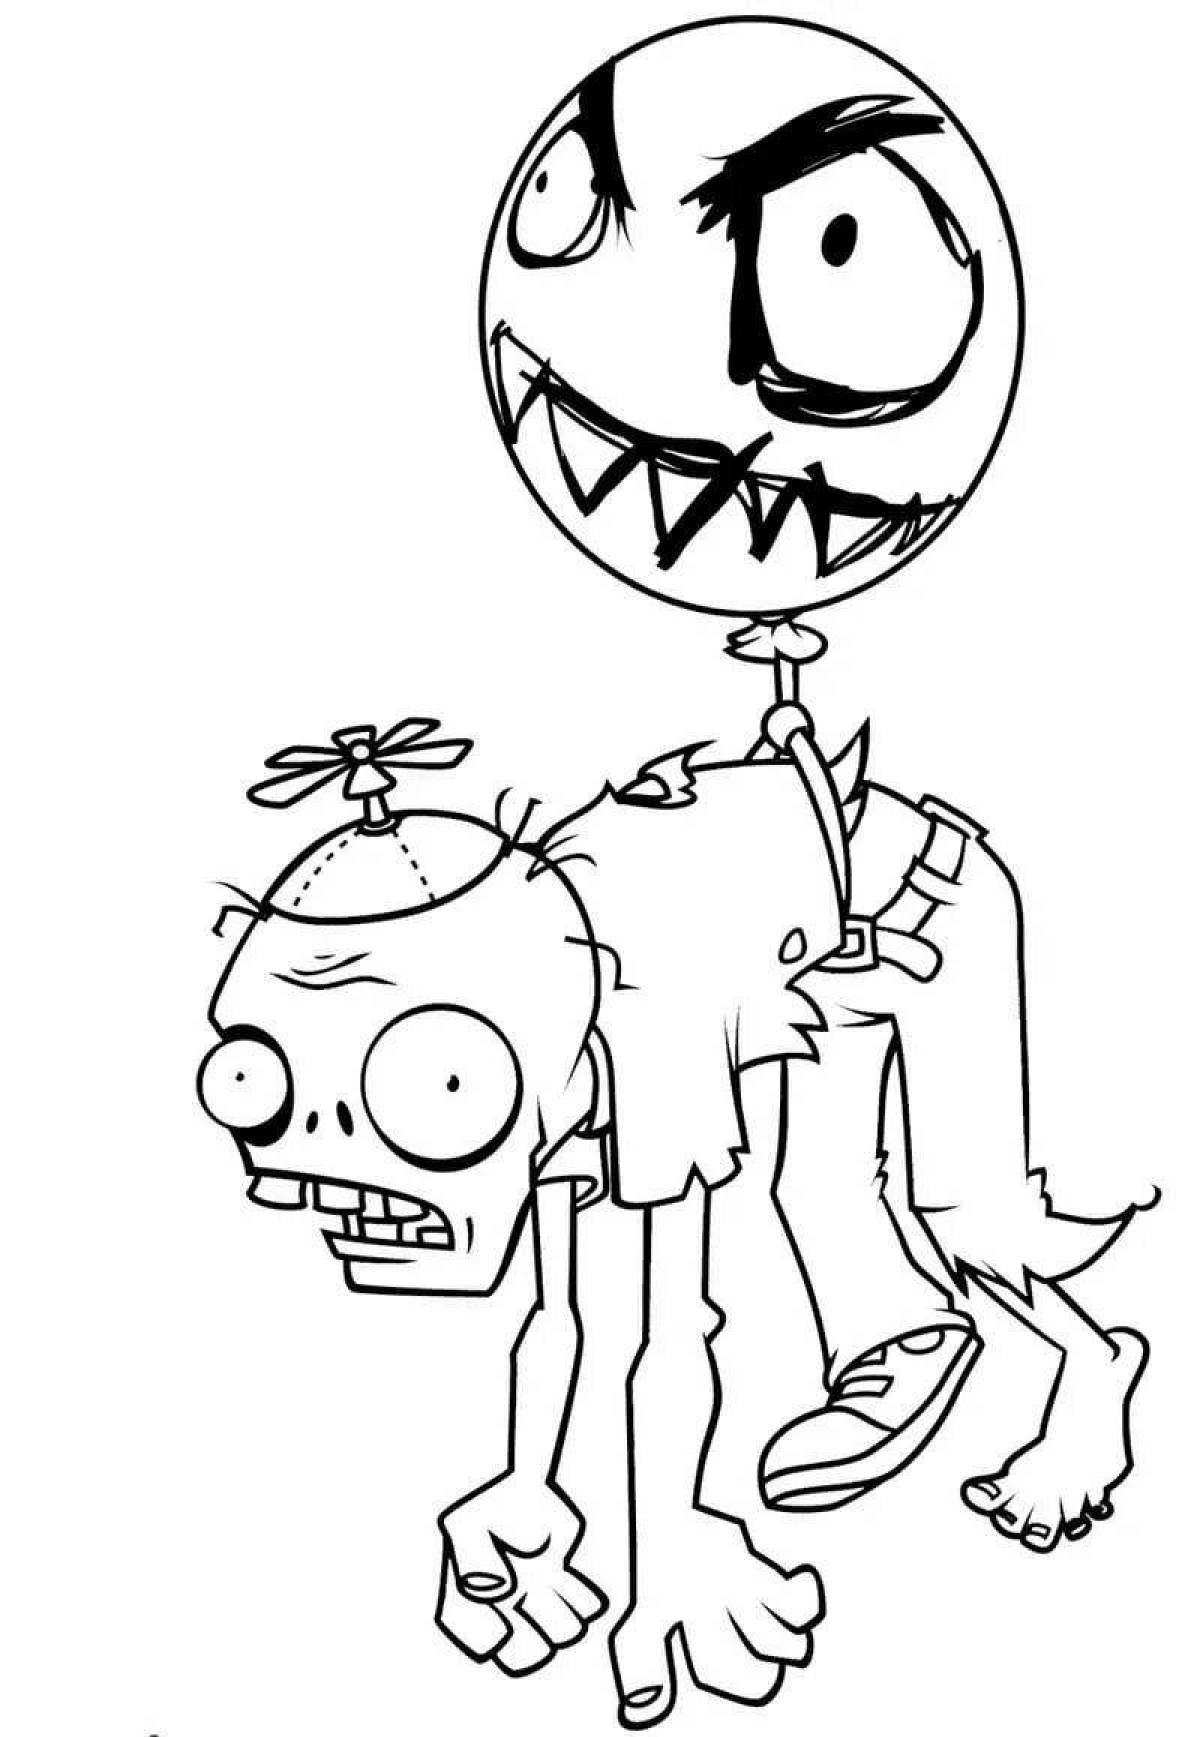 Zombie ghost planet coloring page